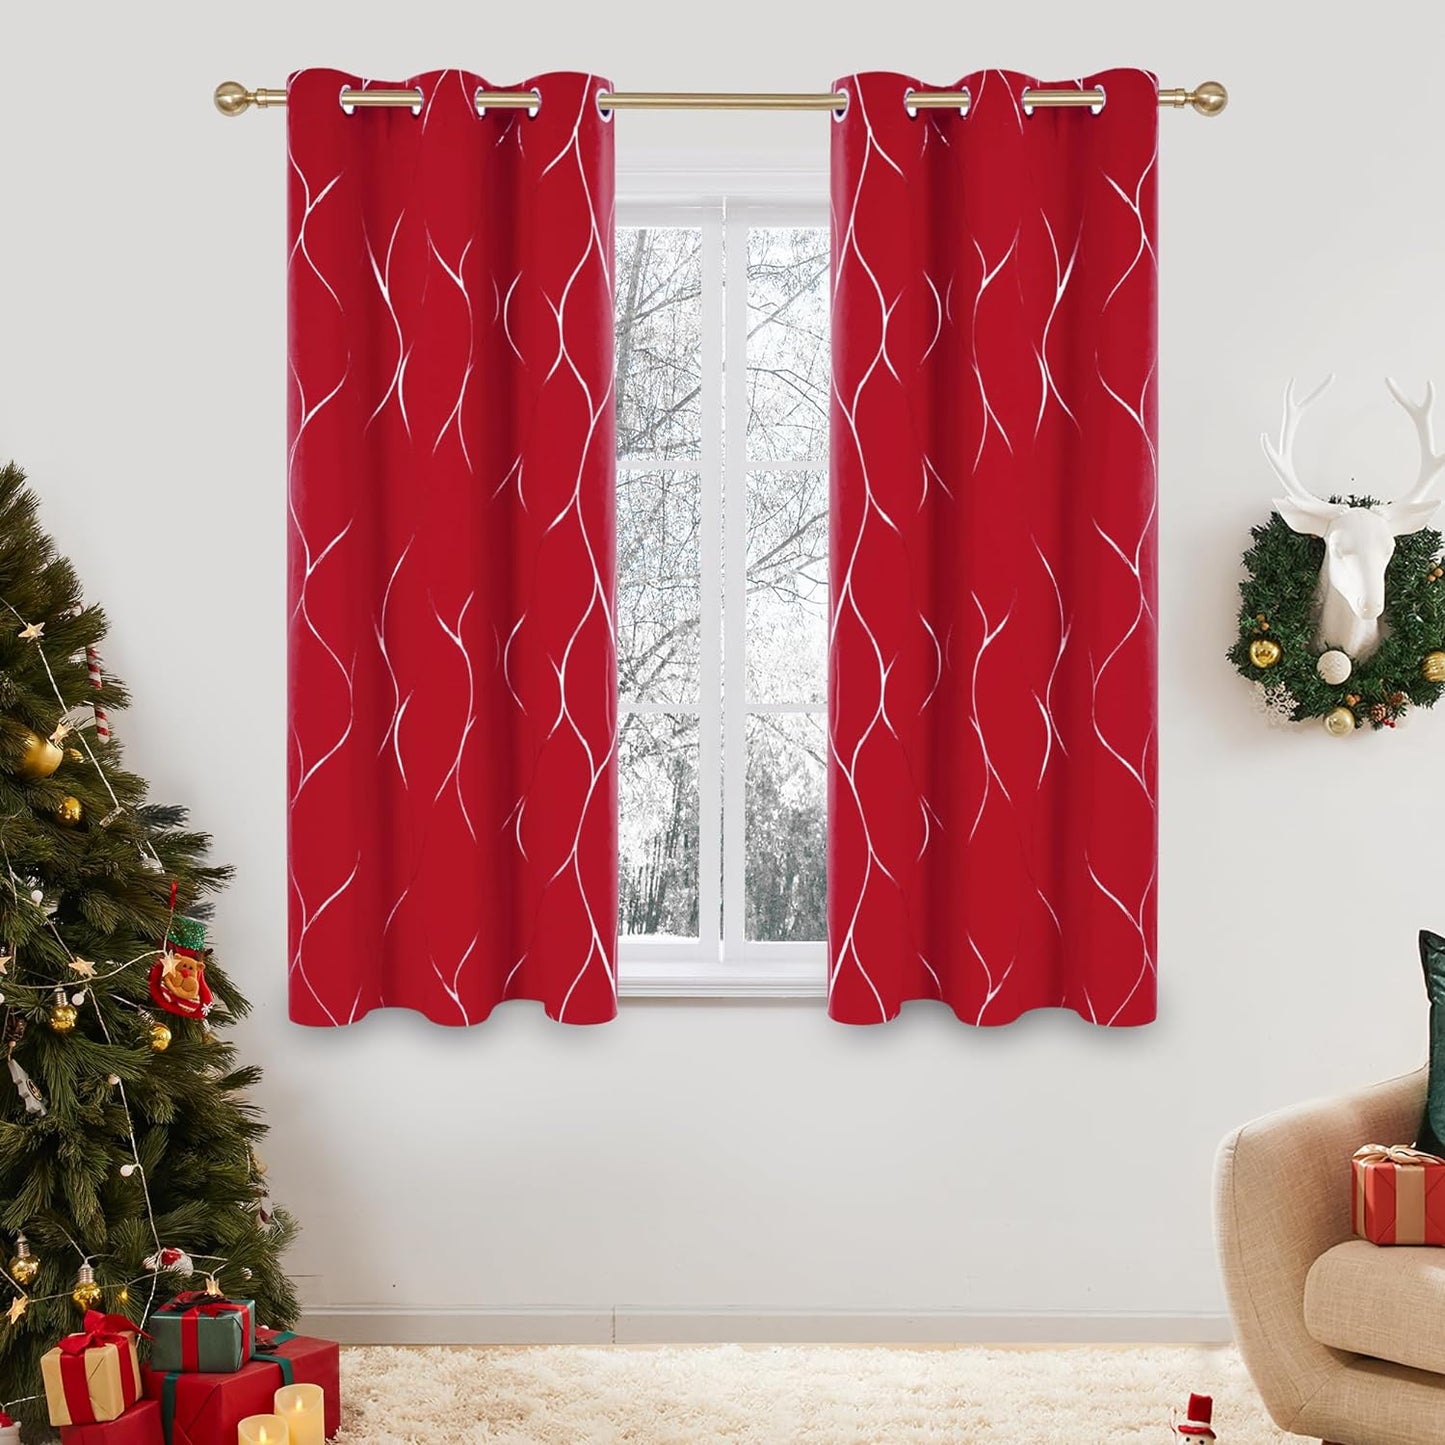 Deconovo Blackout Curtains with Foil Wave Pattern, Grommet Curtain Room Darkening Window Panels, Thermal Insulated Curtain Drapes for Nursery Room (42W X 54L Inch, 2 Panels, Turquoise)  DECONOVO Red W42 X L45 